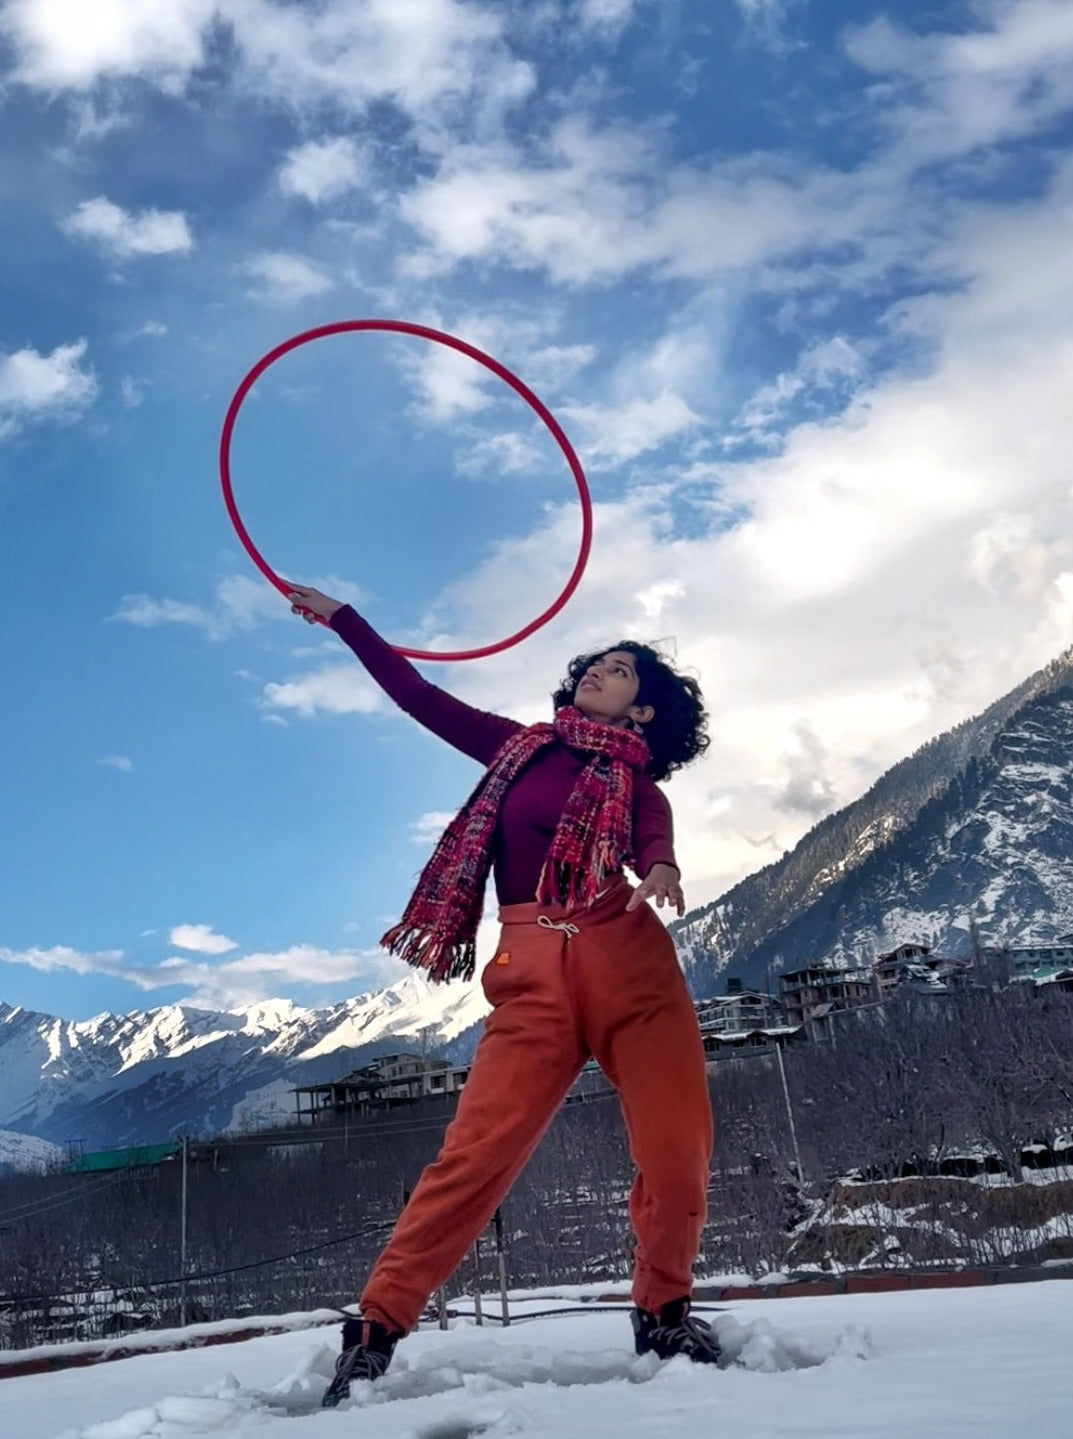 Red Collapsible Hoop